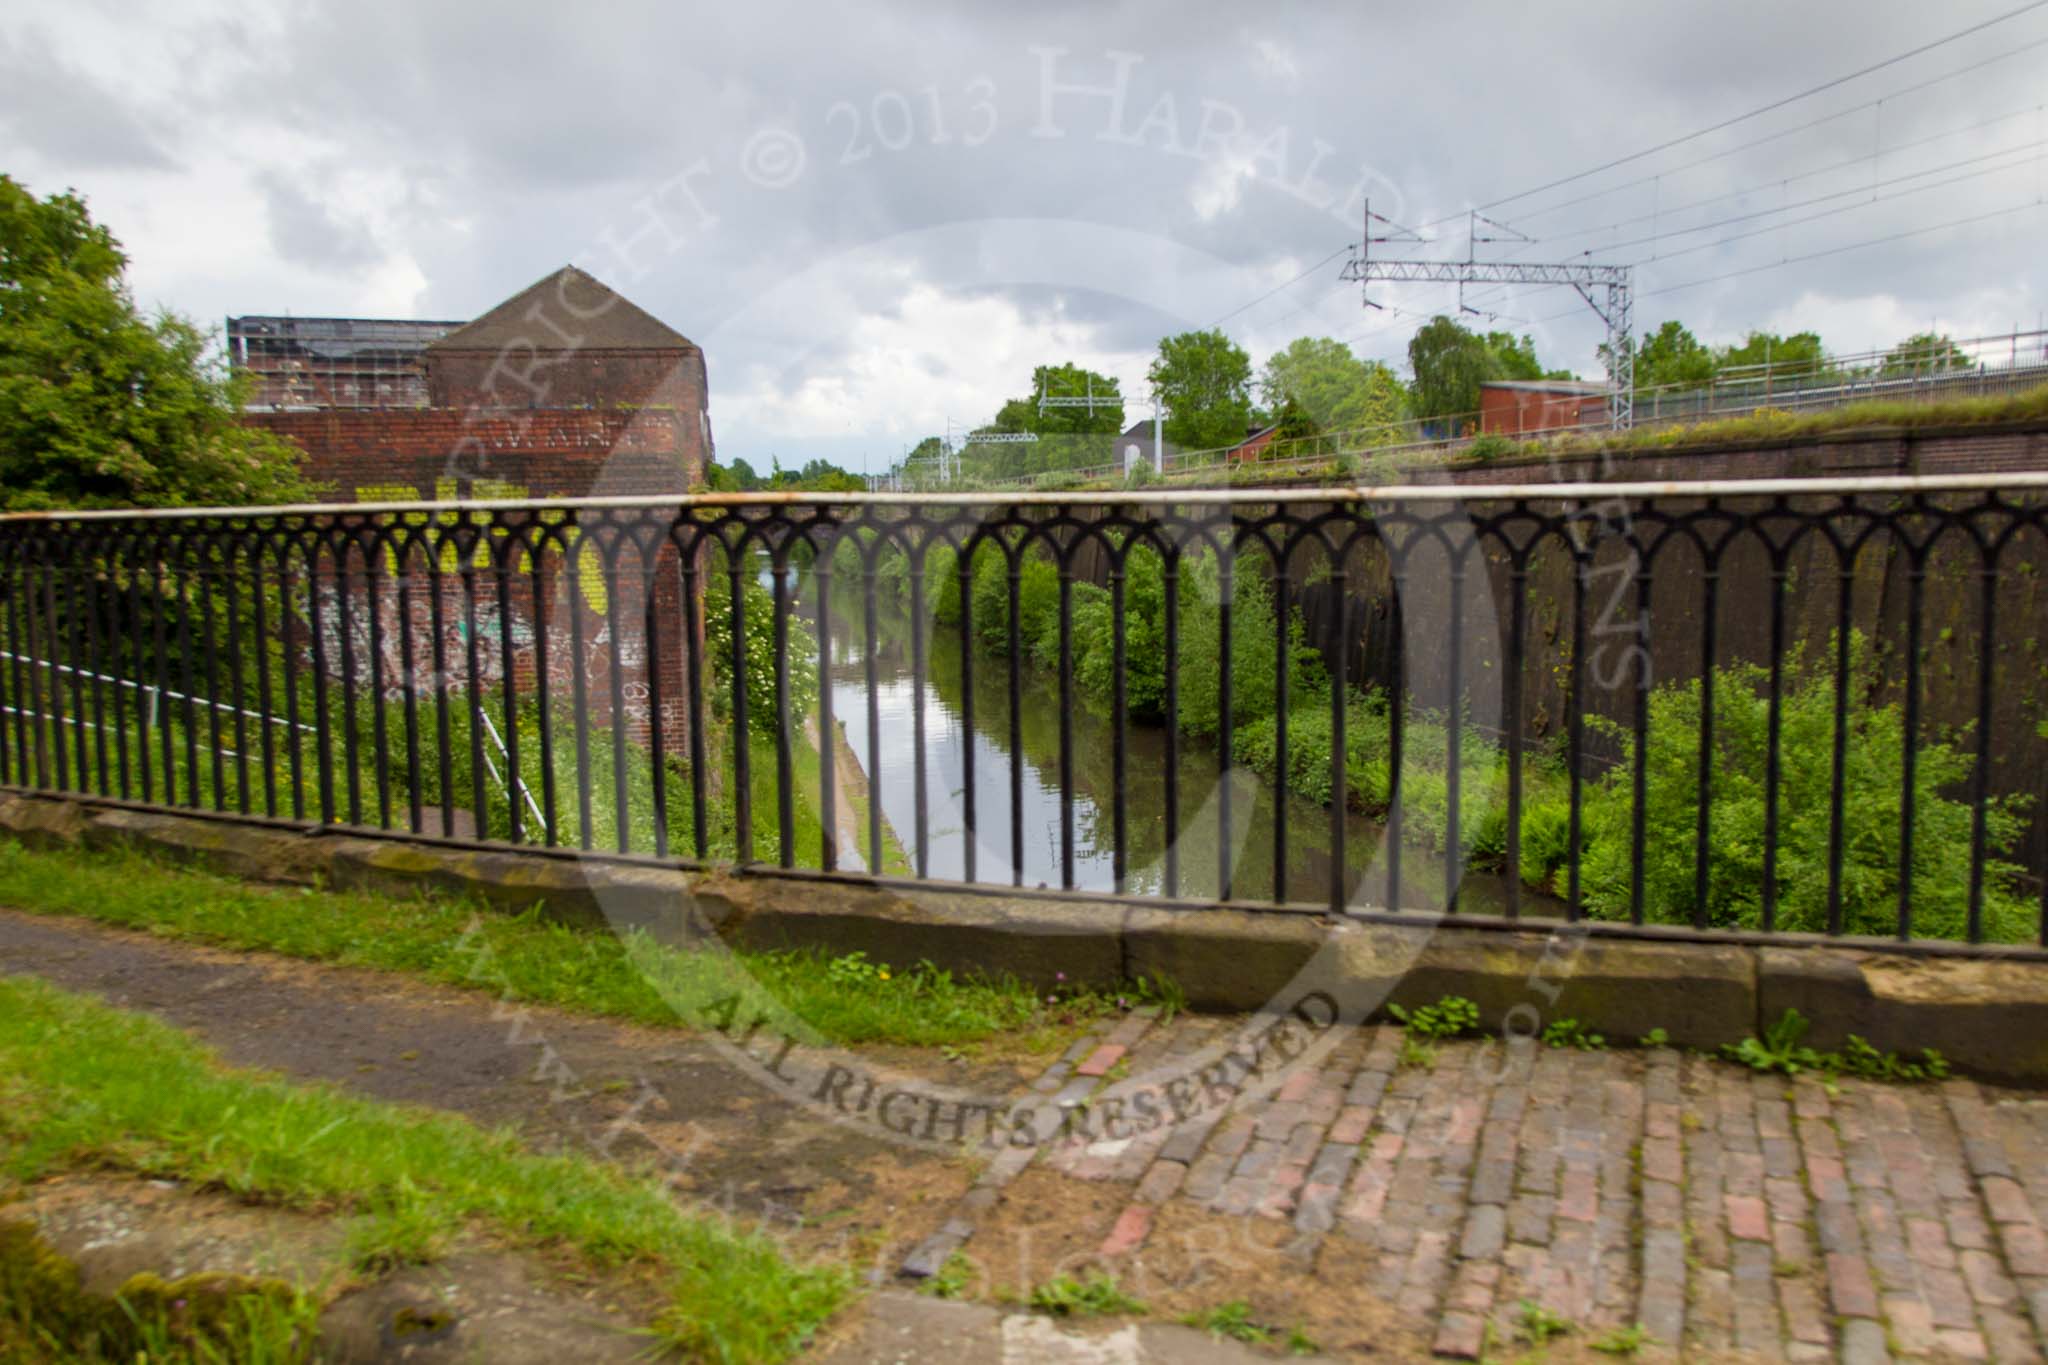 BCN Marathon Challenge 2014: Looking down from the Old Main Line to the New Main Line at Stewart Aqueduct.
Birmingham Canal Navigation,


United Kingdom,
on 24 May 2014 at 18:10, image #176